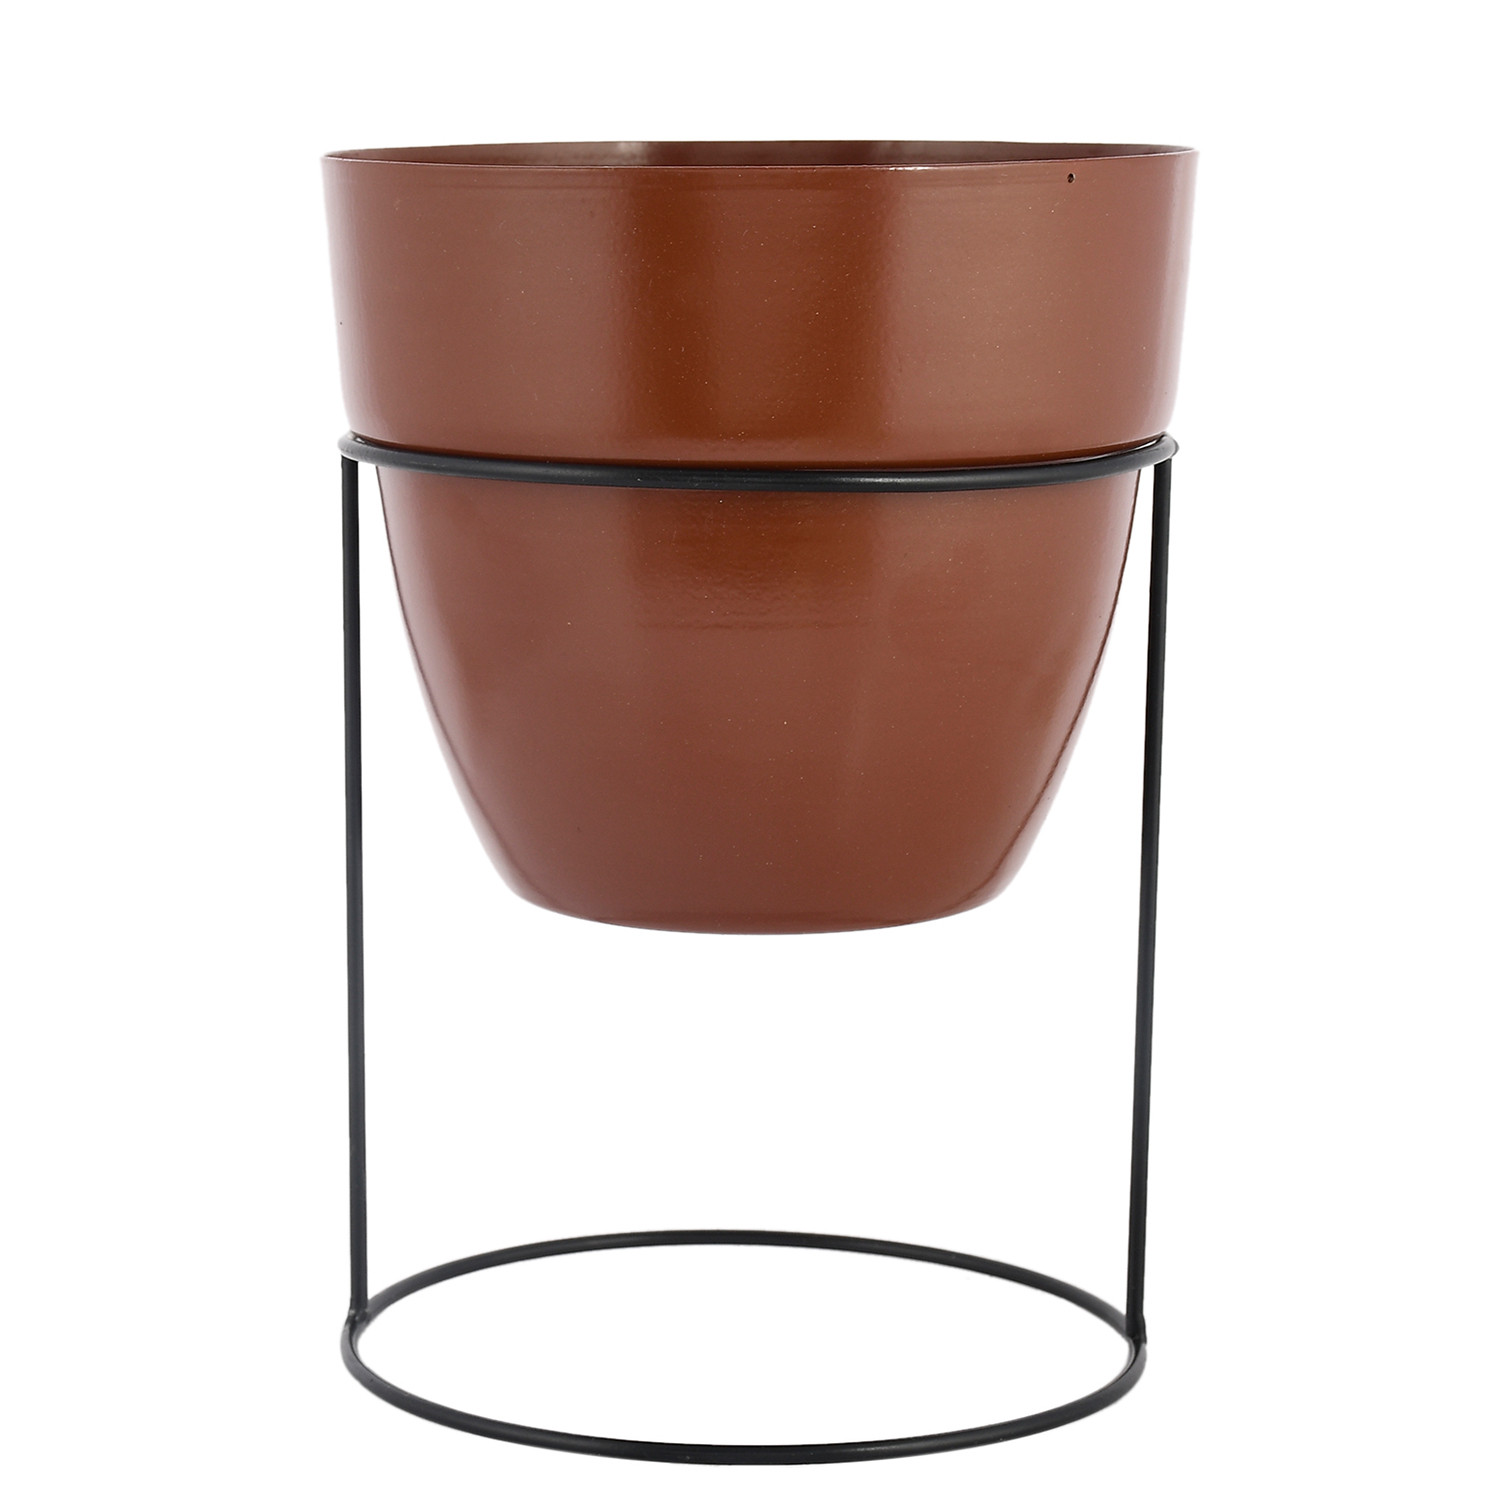 Kuber Industries Metal Planter|Decorative Modern Indoor Desk Pot|Iron Table Stand Flower Planter Pot For Home Décor,8.5 Inches,(Terracotta)